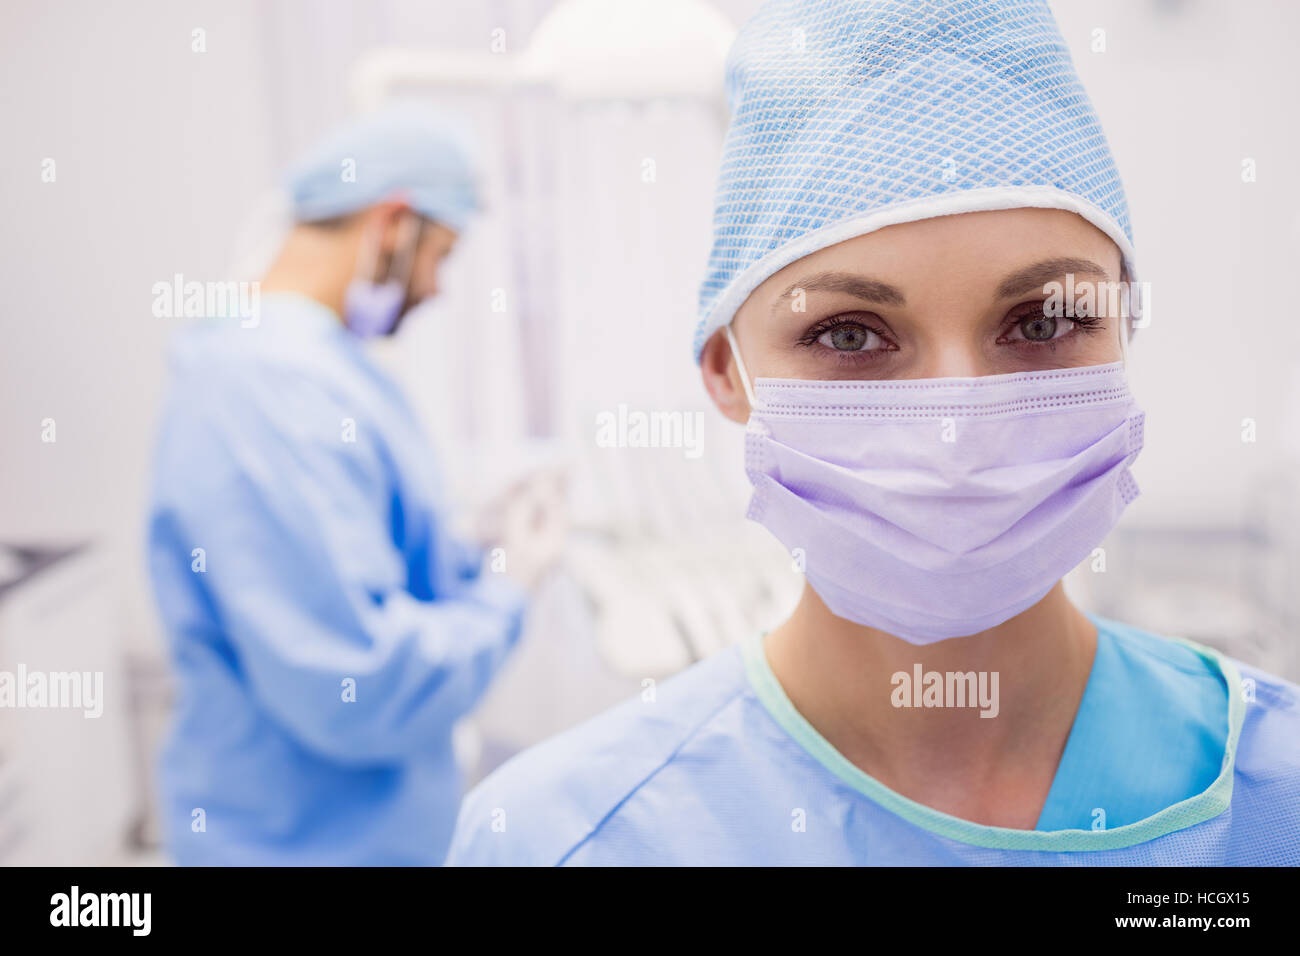 Portrait of female dentist wearing surgical mask Stock Photo